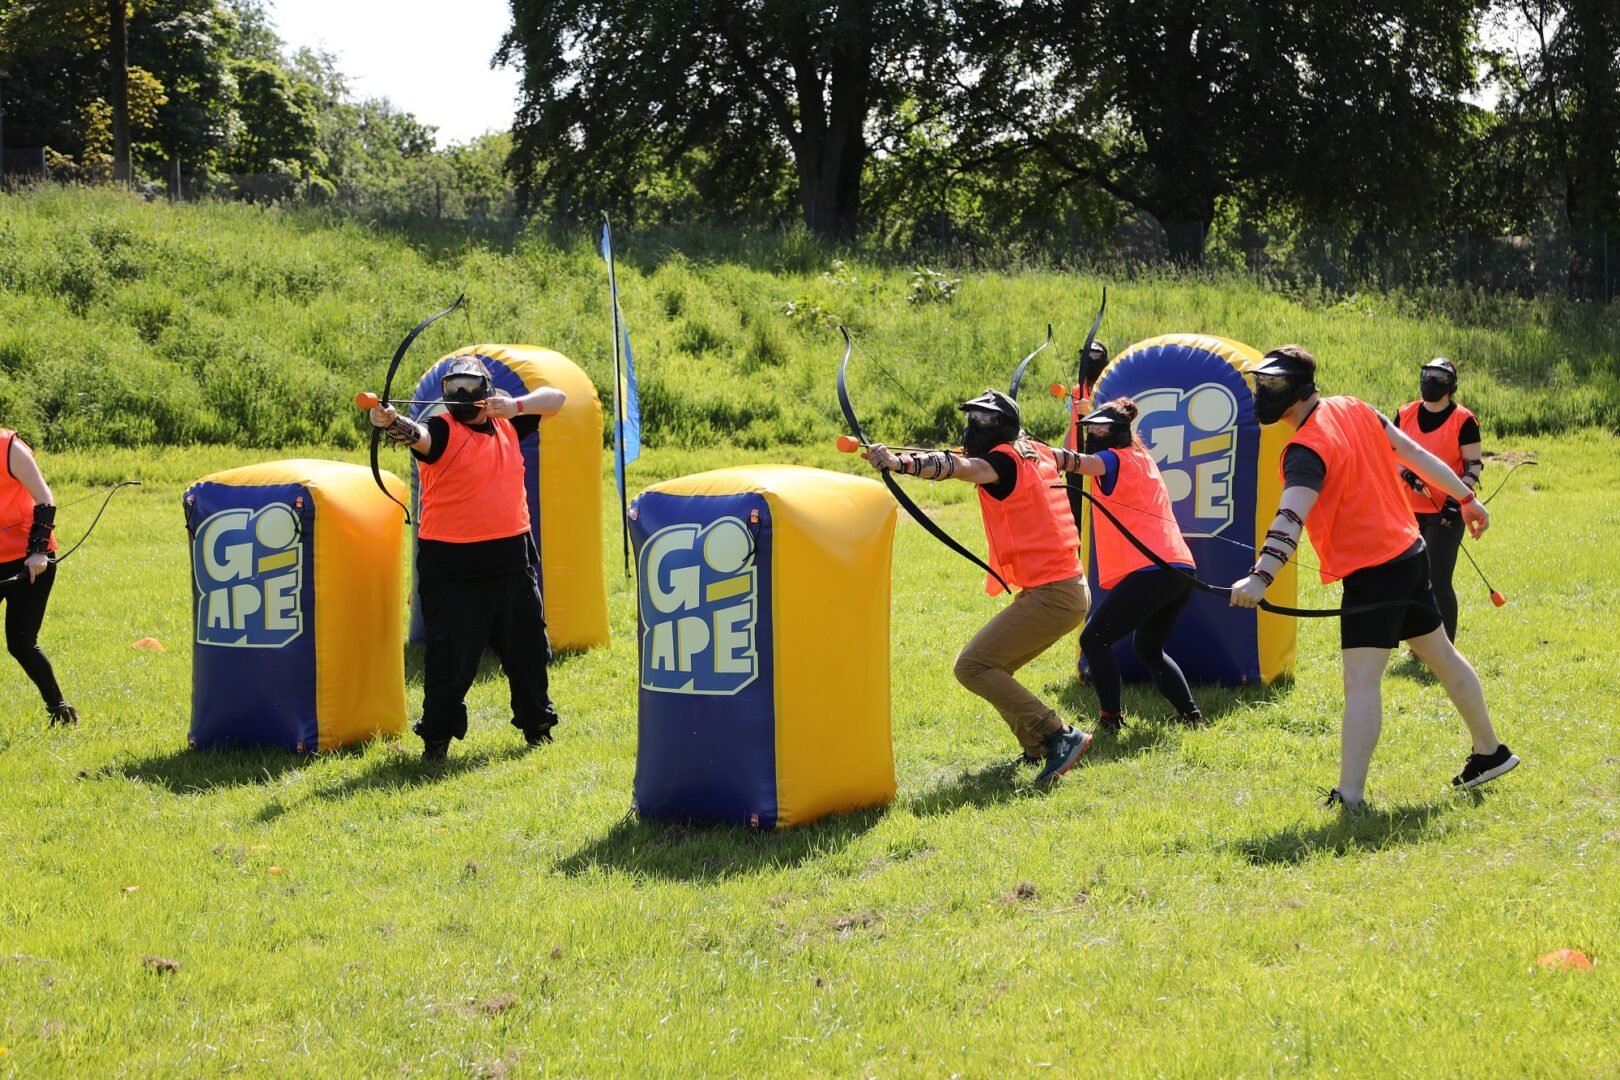 People taking part in Archery Tag at Go Ape